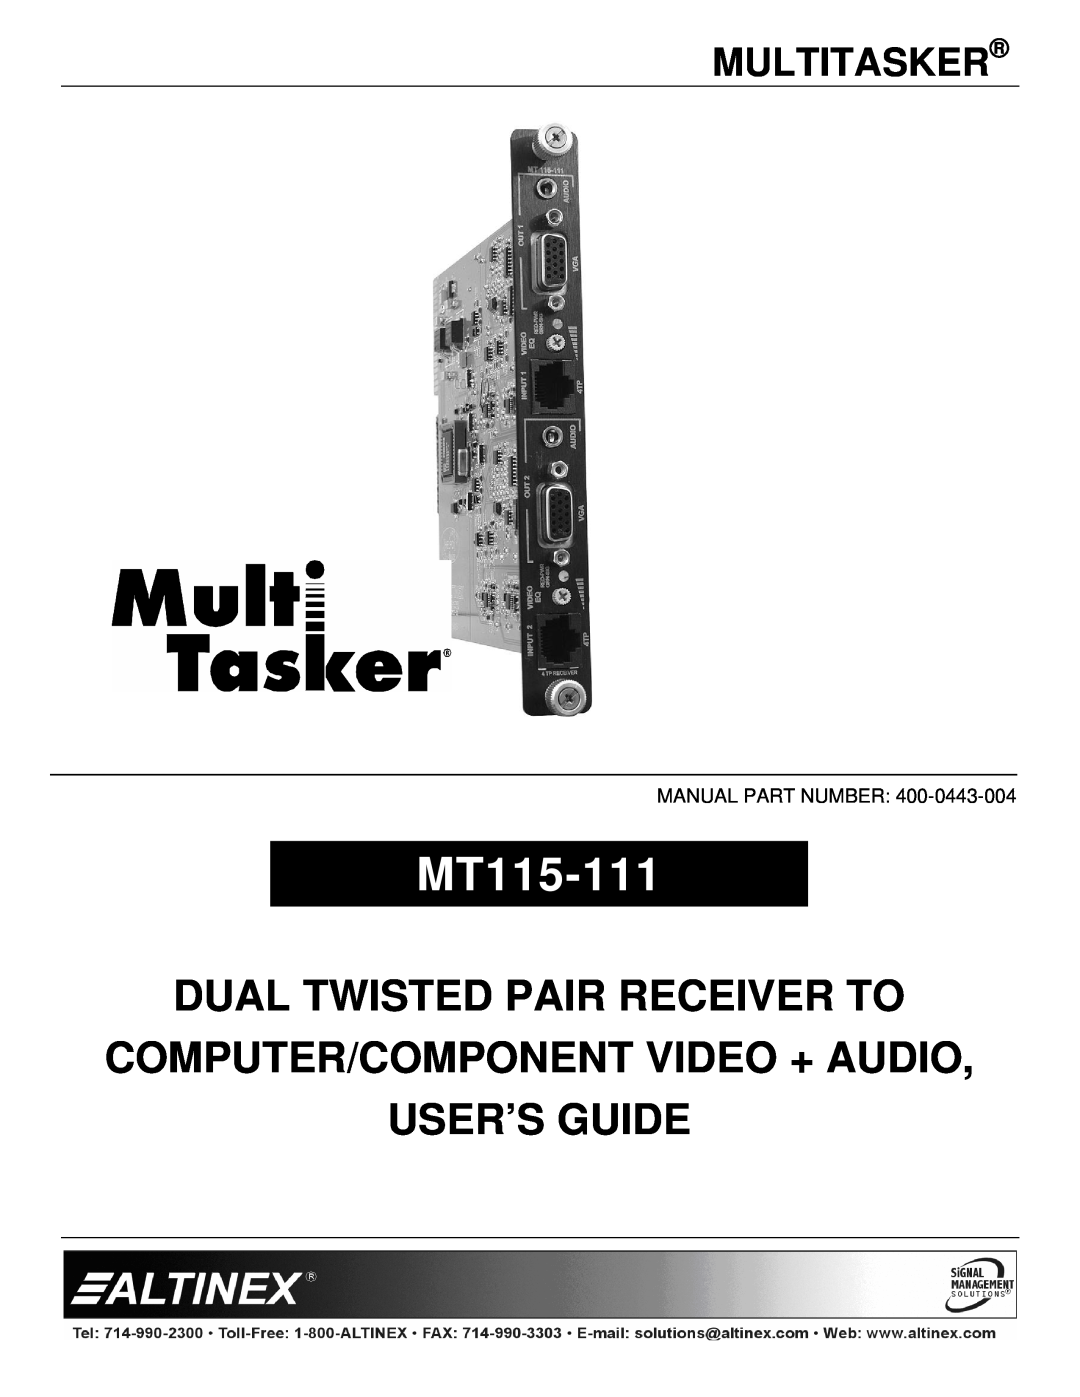 Altinex MT115-111 manual Multitasker, Dual Twisted Pair Receiver To, Computer/Component Video + Audio User’S Guide 